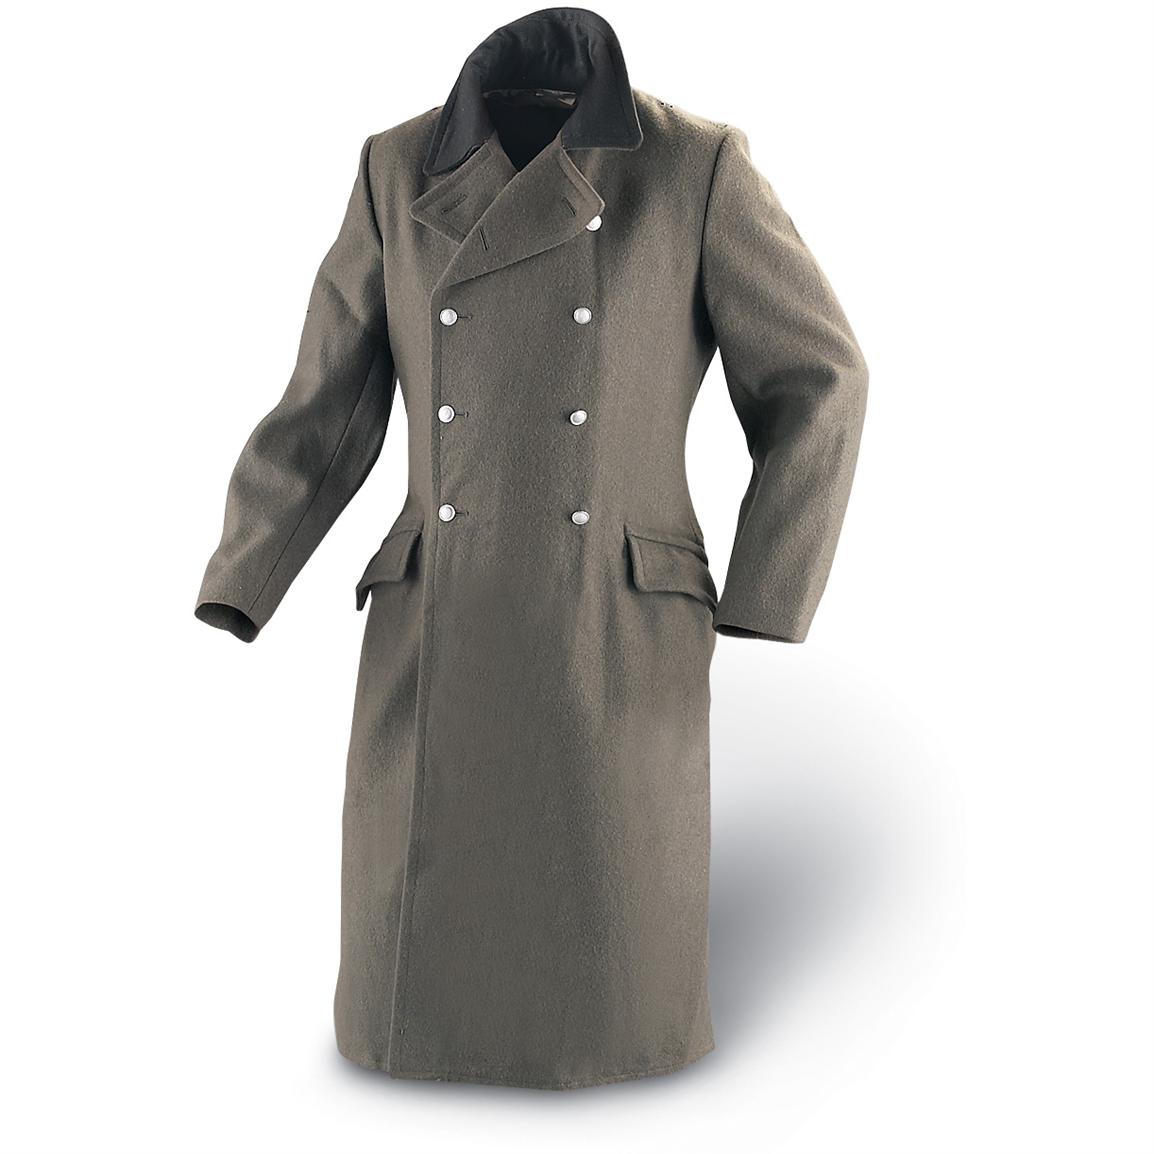 Used E. German Wool Coat - 81440, Insulated Jackets & Coats at ...